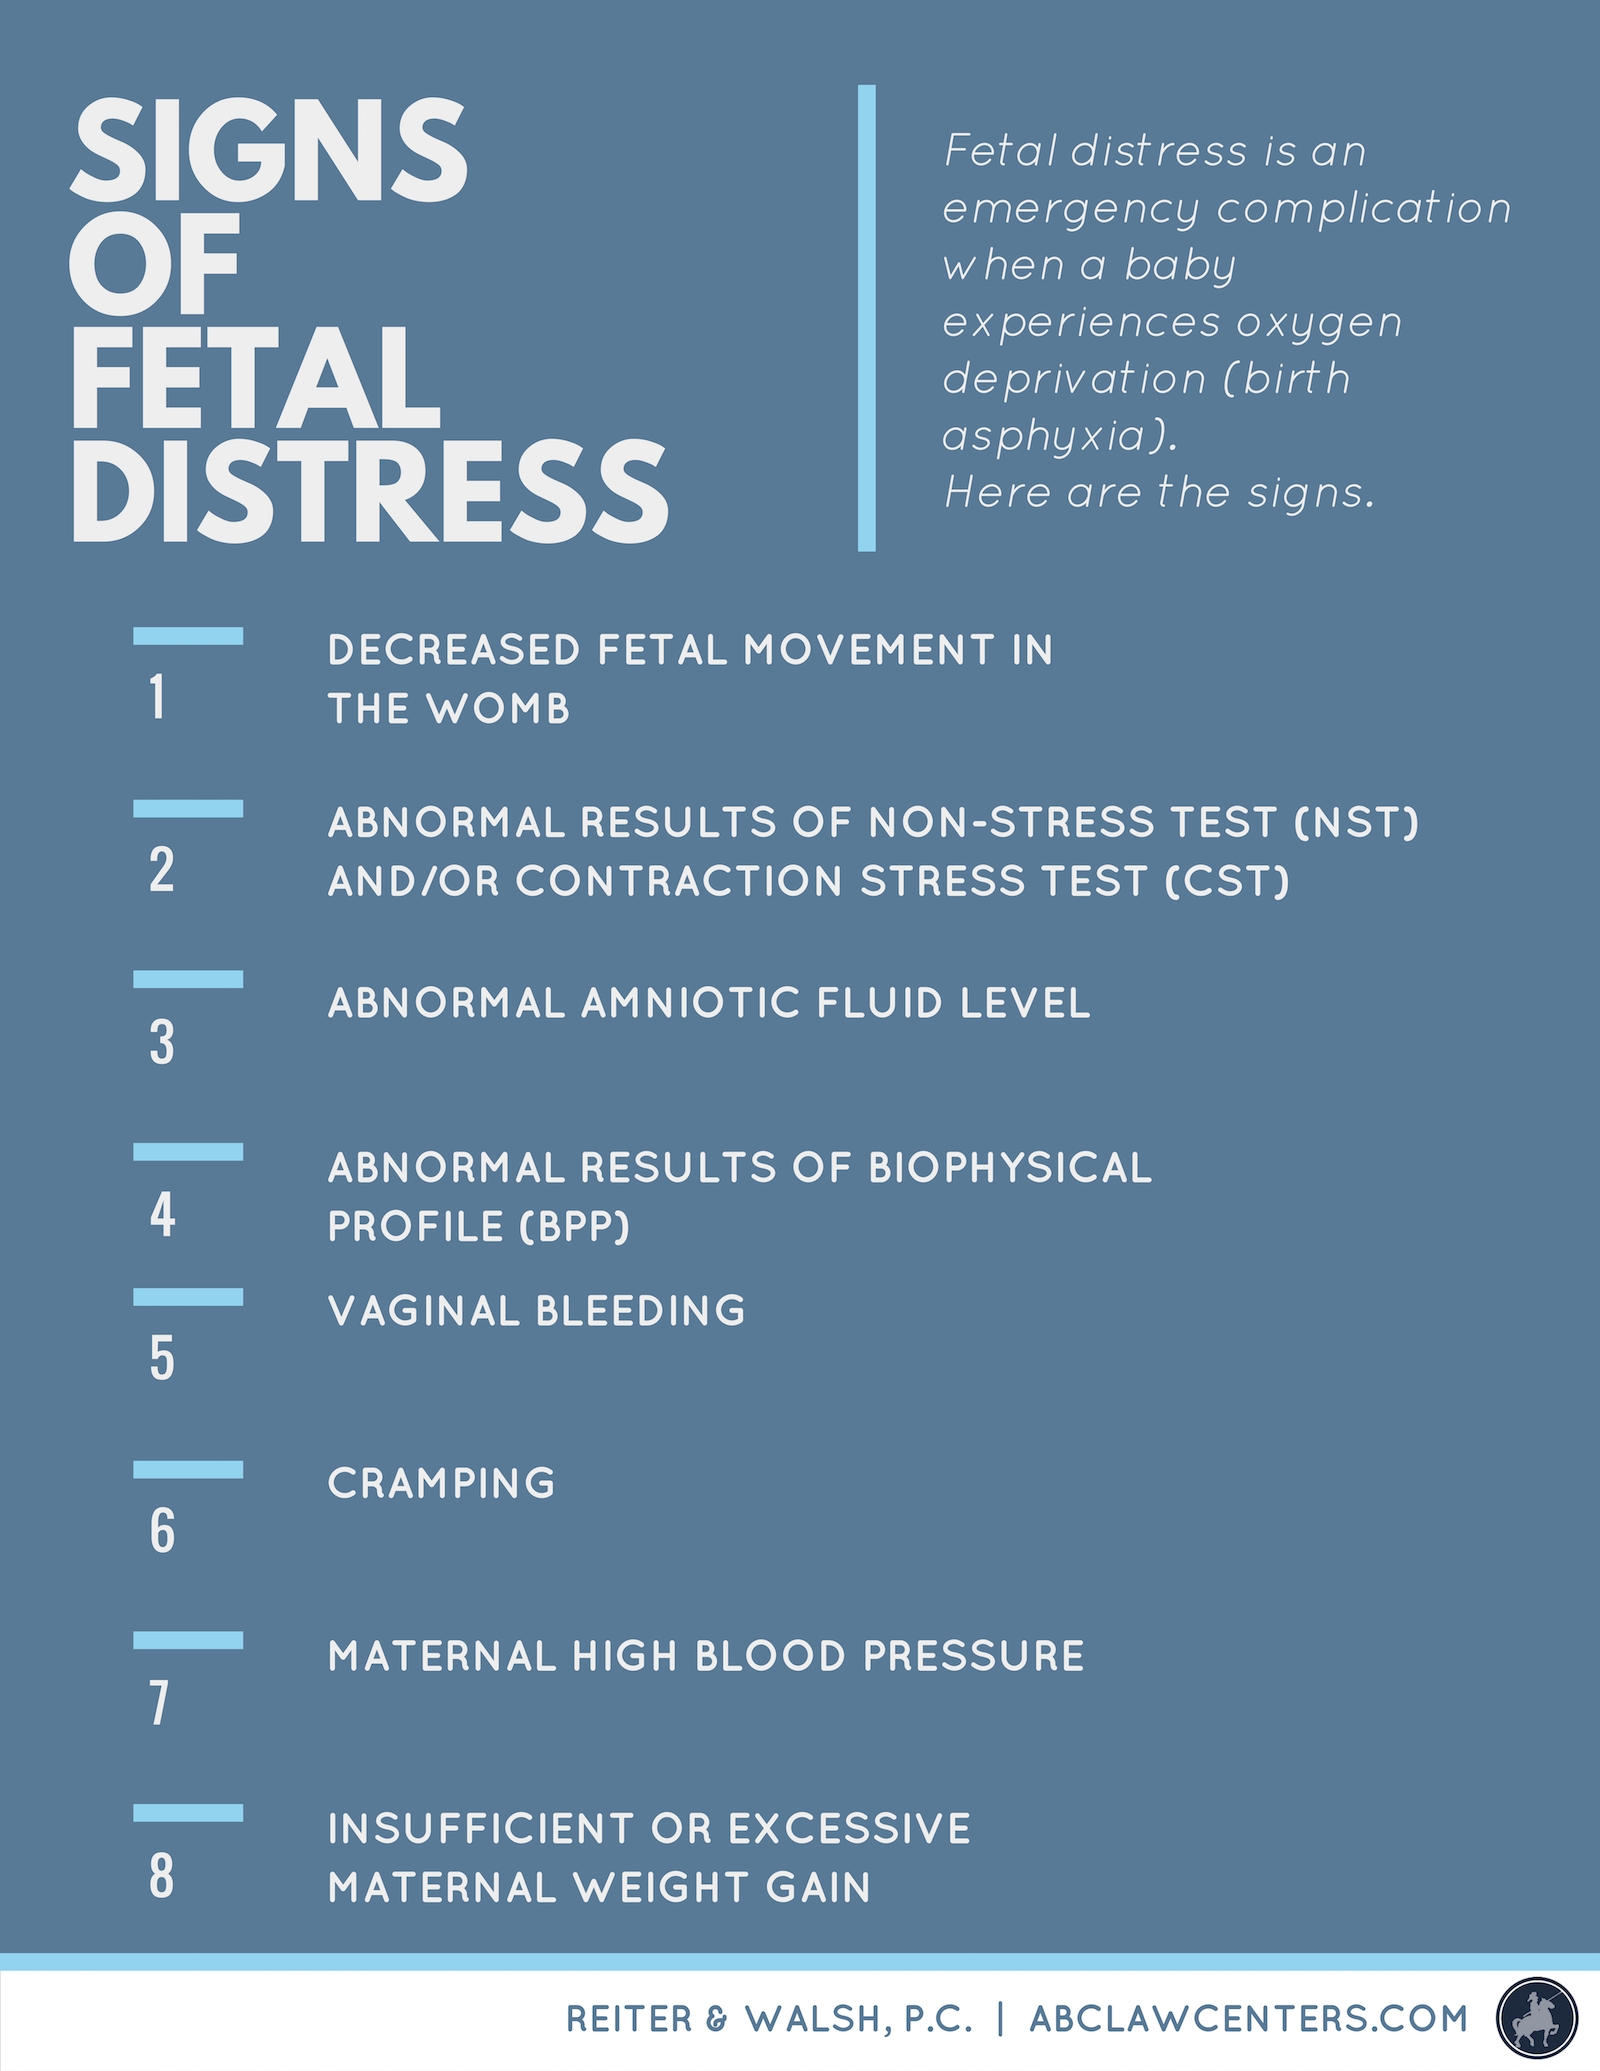 Signs Of Fetal Distress And Oxygen Deprivation | Faqs inside How To Get Your Unborn Baby To Gain Weight